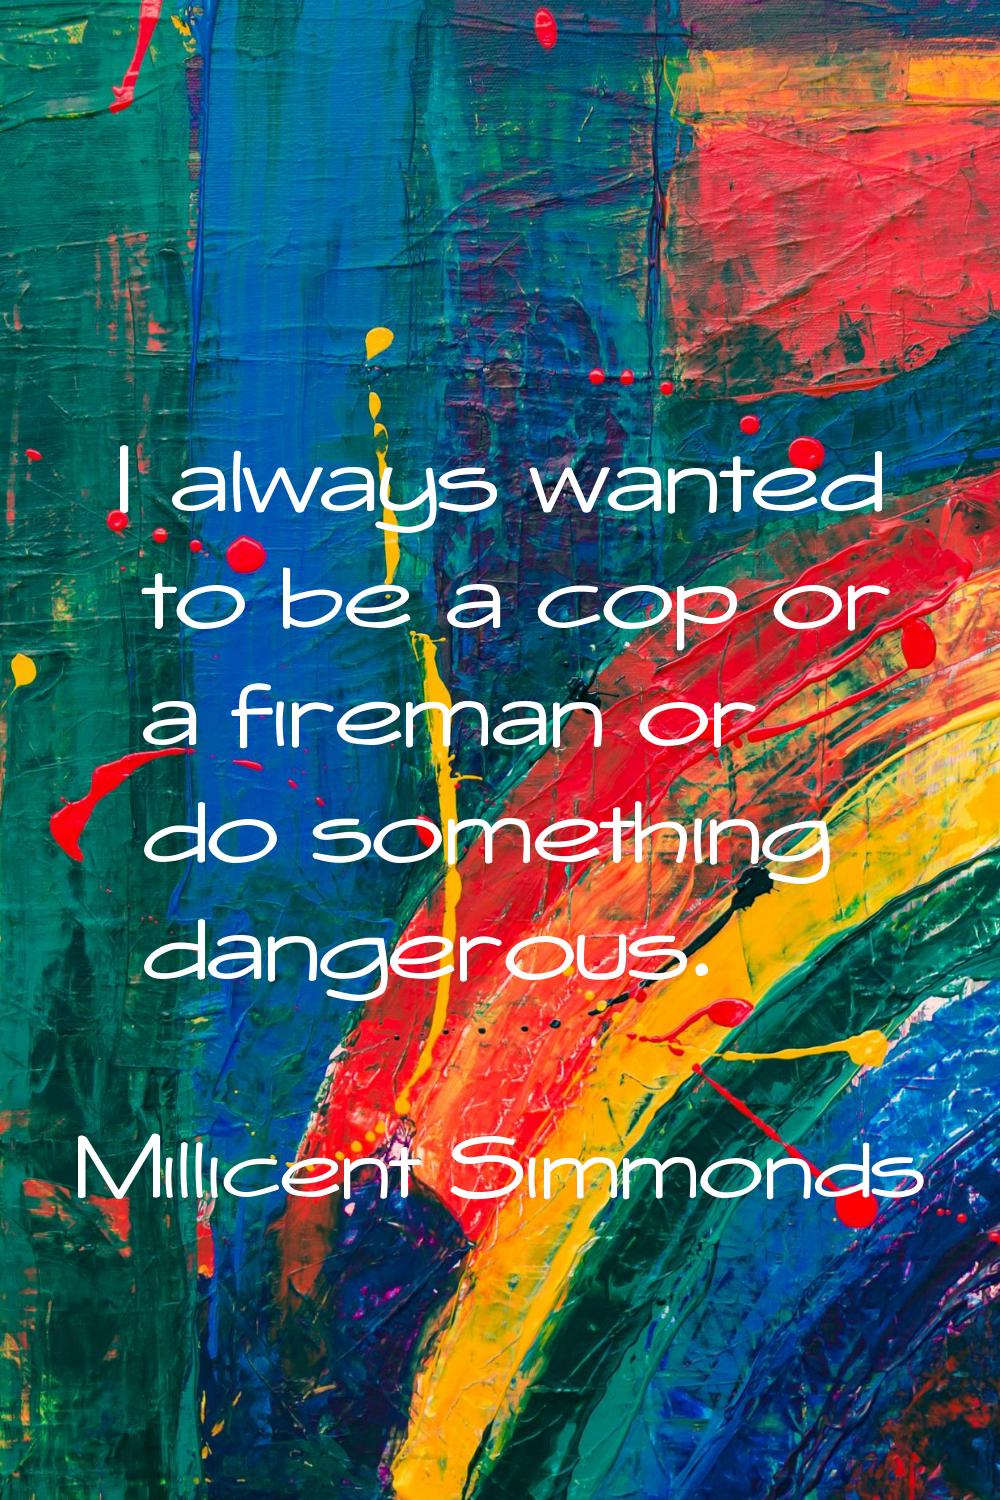 I always wanted to be a cop or a fireman or do something dangerous.